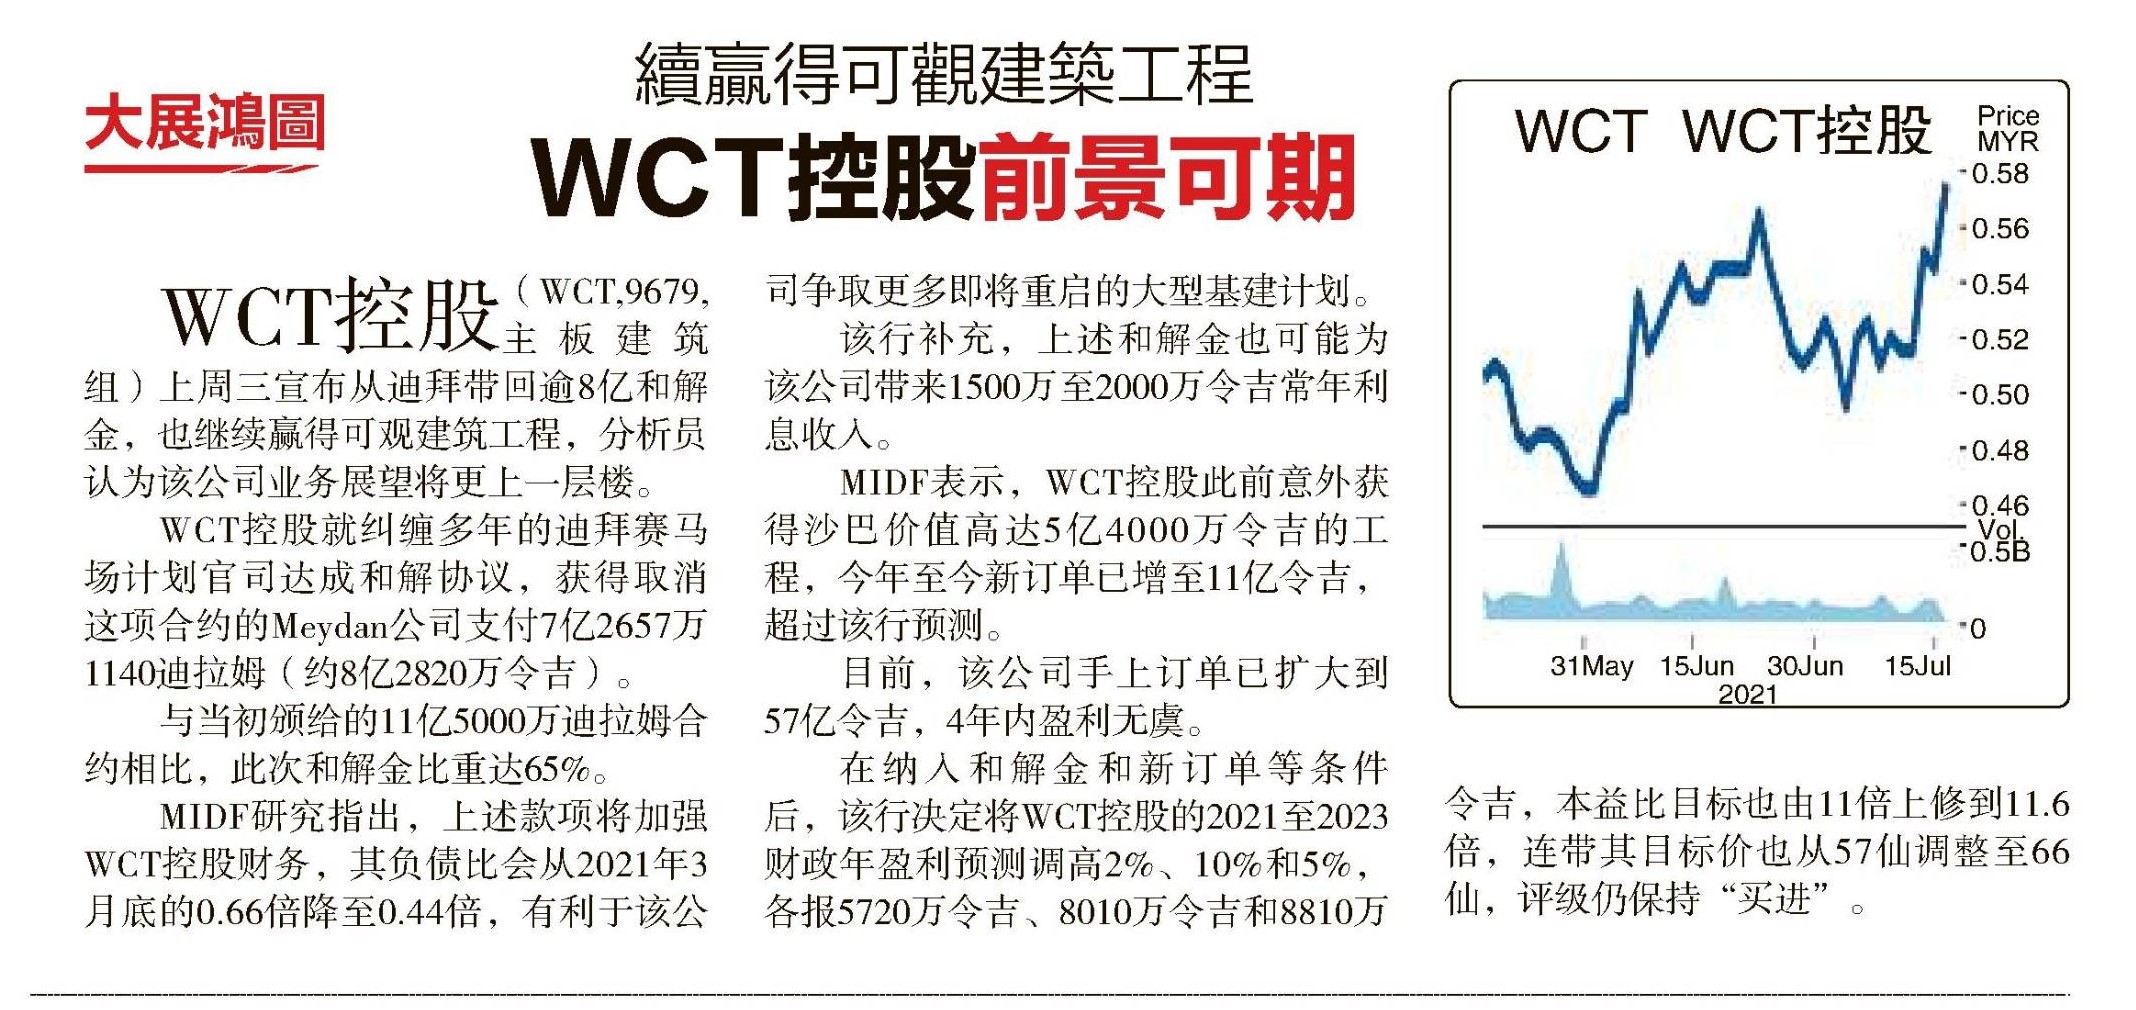 Wct share price